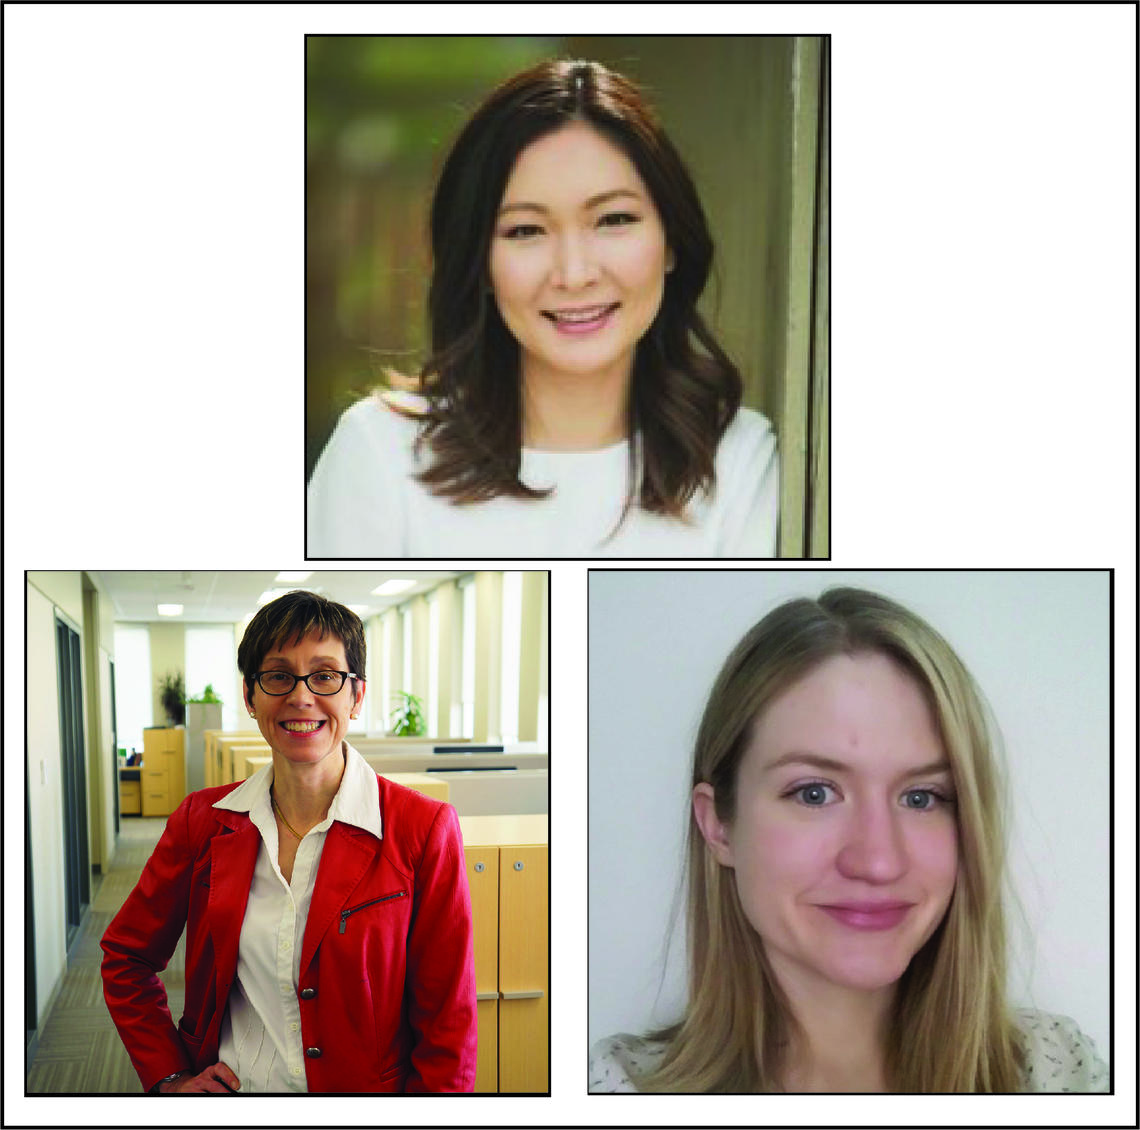 Keynote speakers for the 2019 Women in Data Science Cumming School of Medicine Conference are: Rena Tabata (top), Dr. Lisa Lix, PhD, (bottom left), Jacqueline Harris (bottom right).